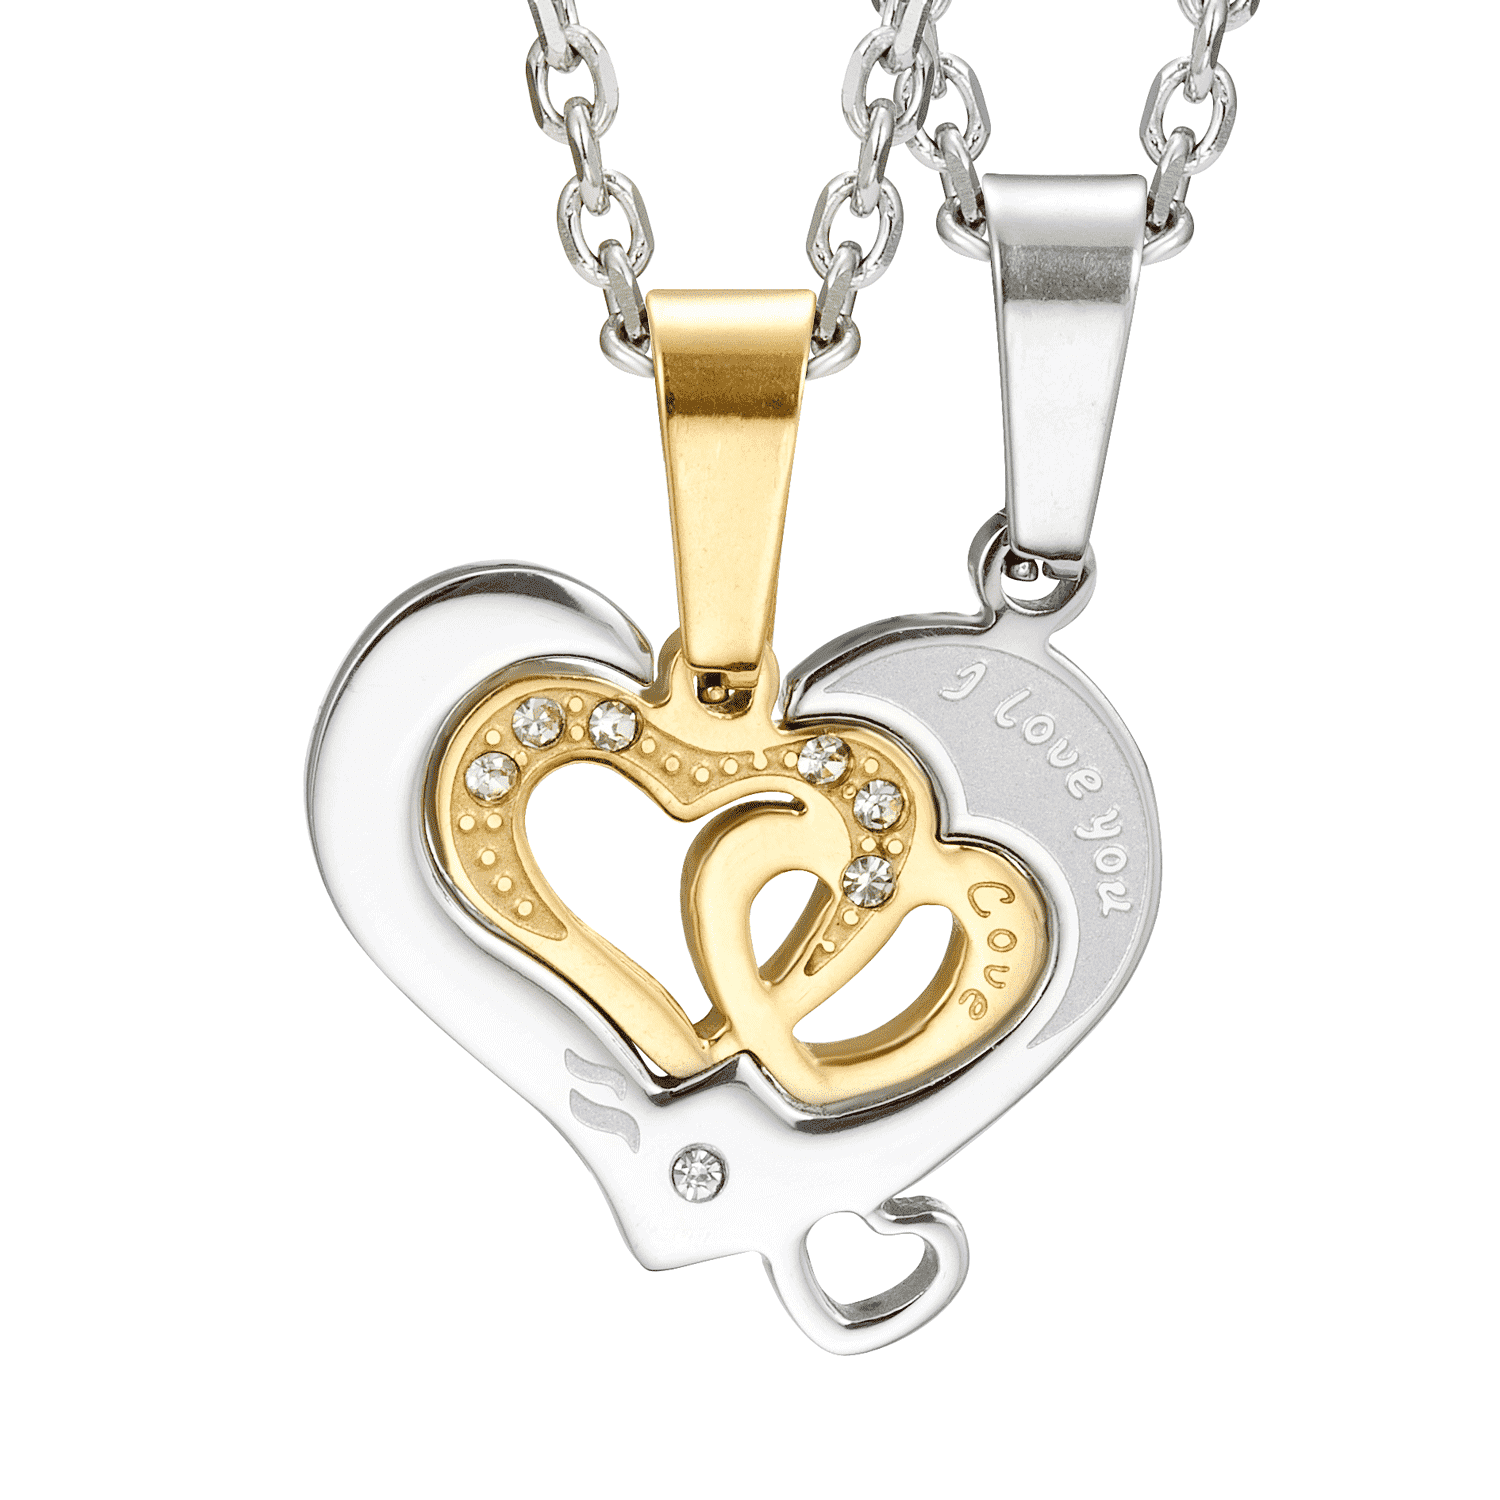 VA I Love You Matching Heart His&Hers Couple Pendant Stainless Steel Necklace Rosegold